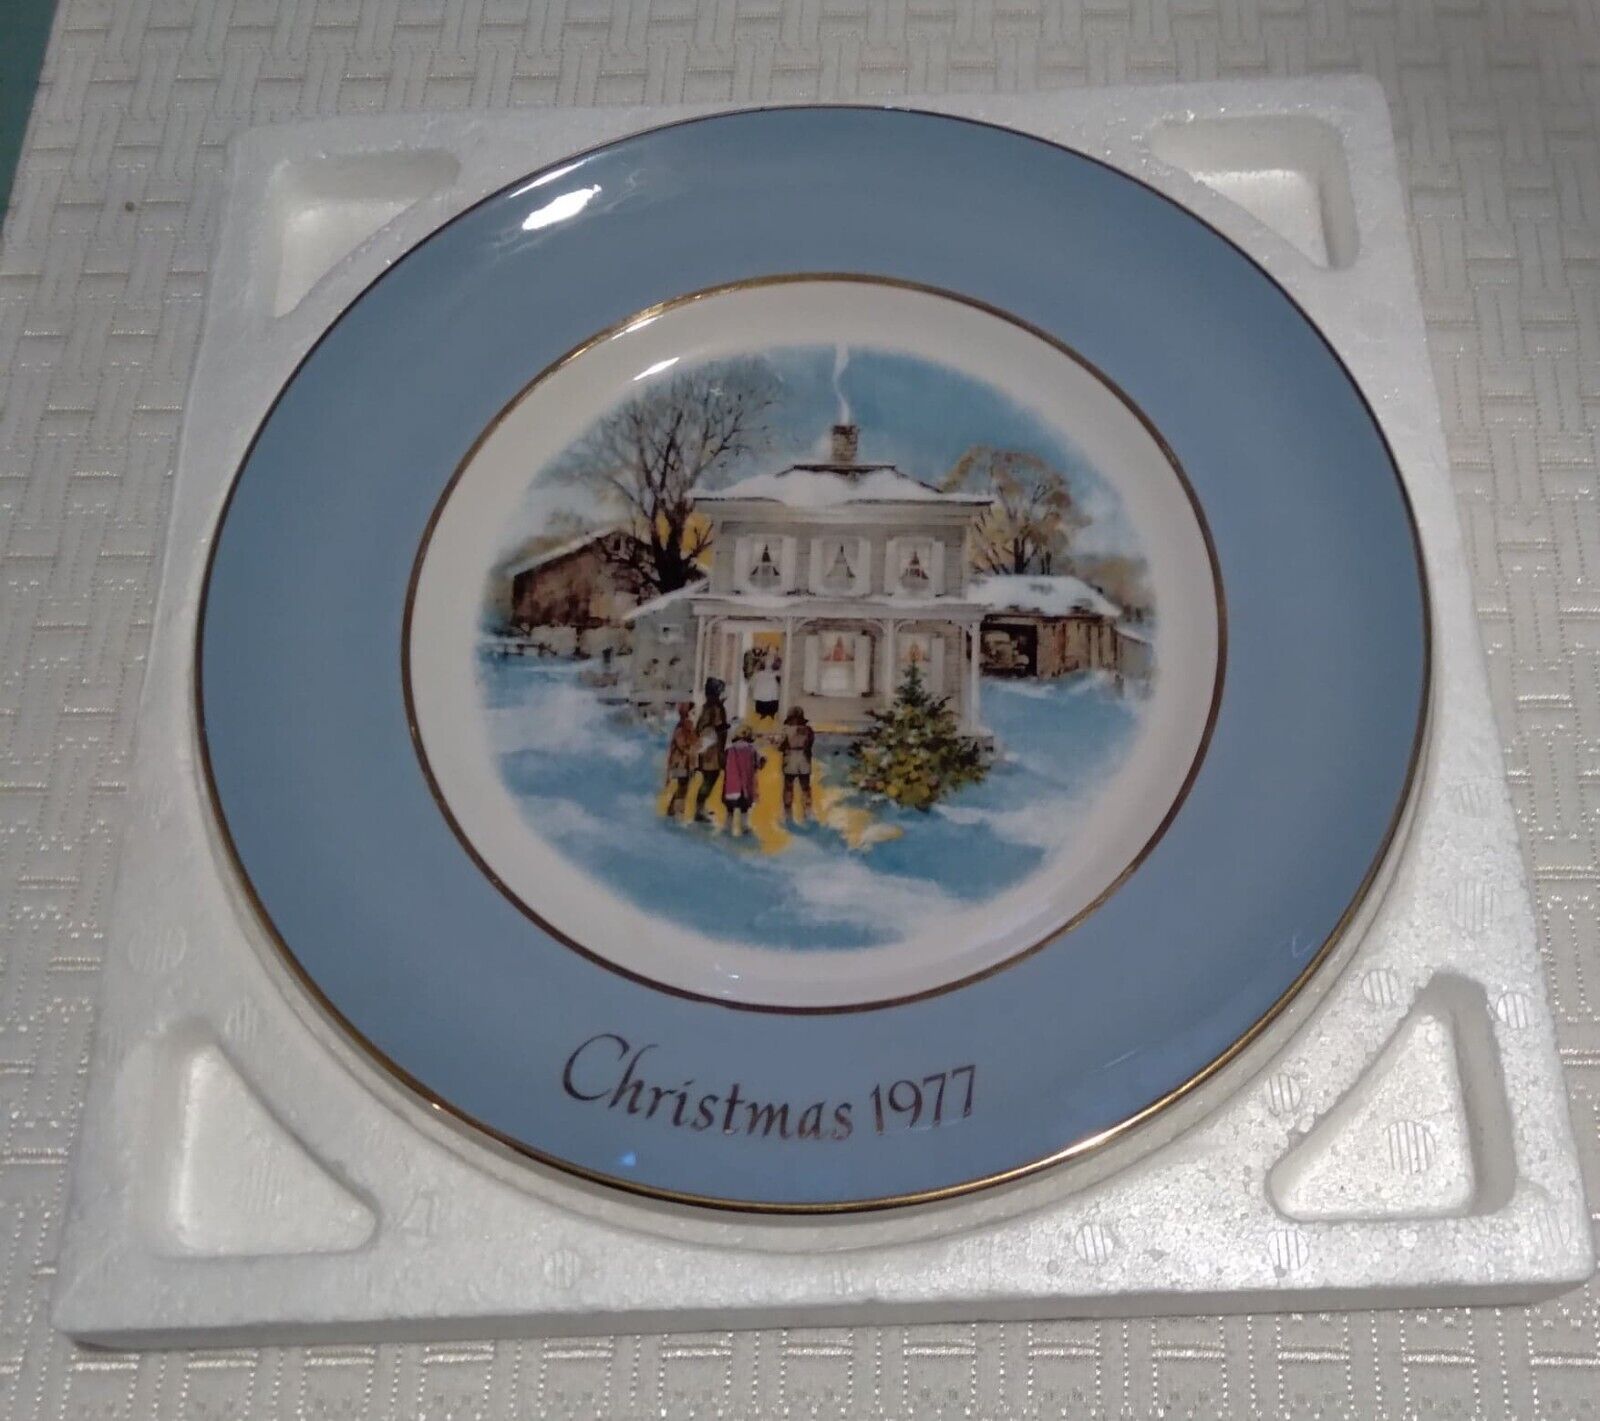 1977 AVON ENOCH WEDGWOOD CAROLLERS IN THE SNOW PLATE MADE IN ENGLAND